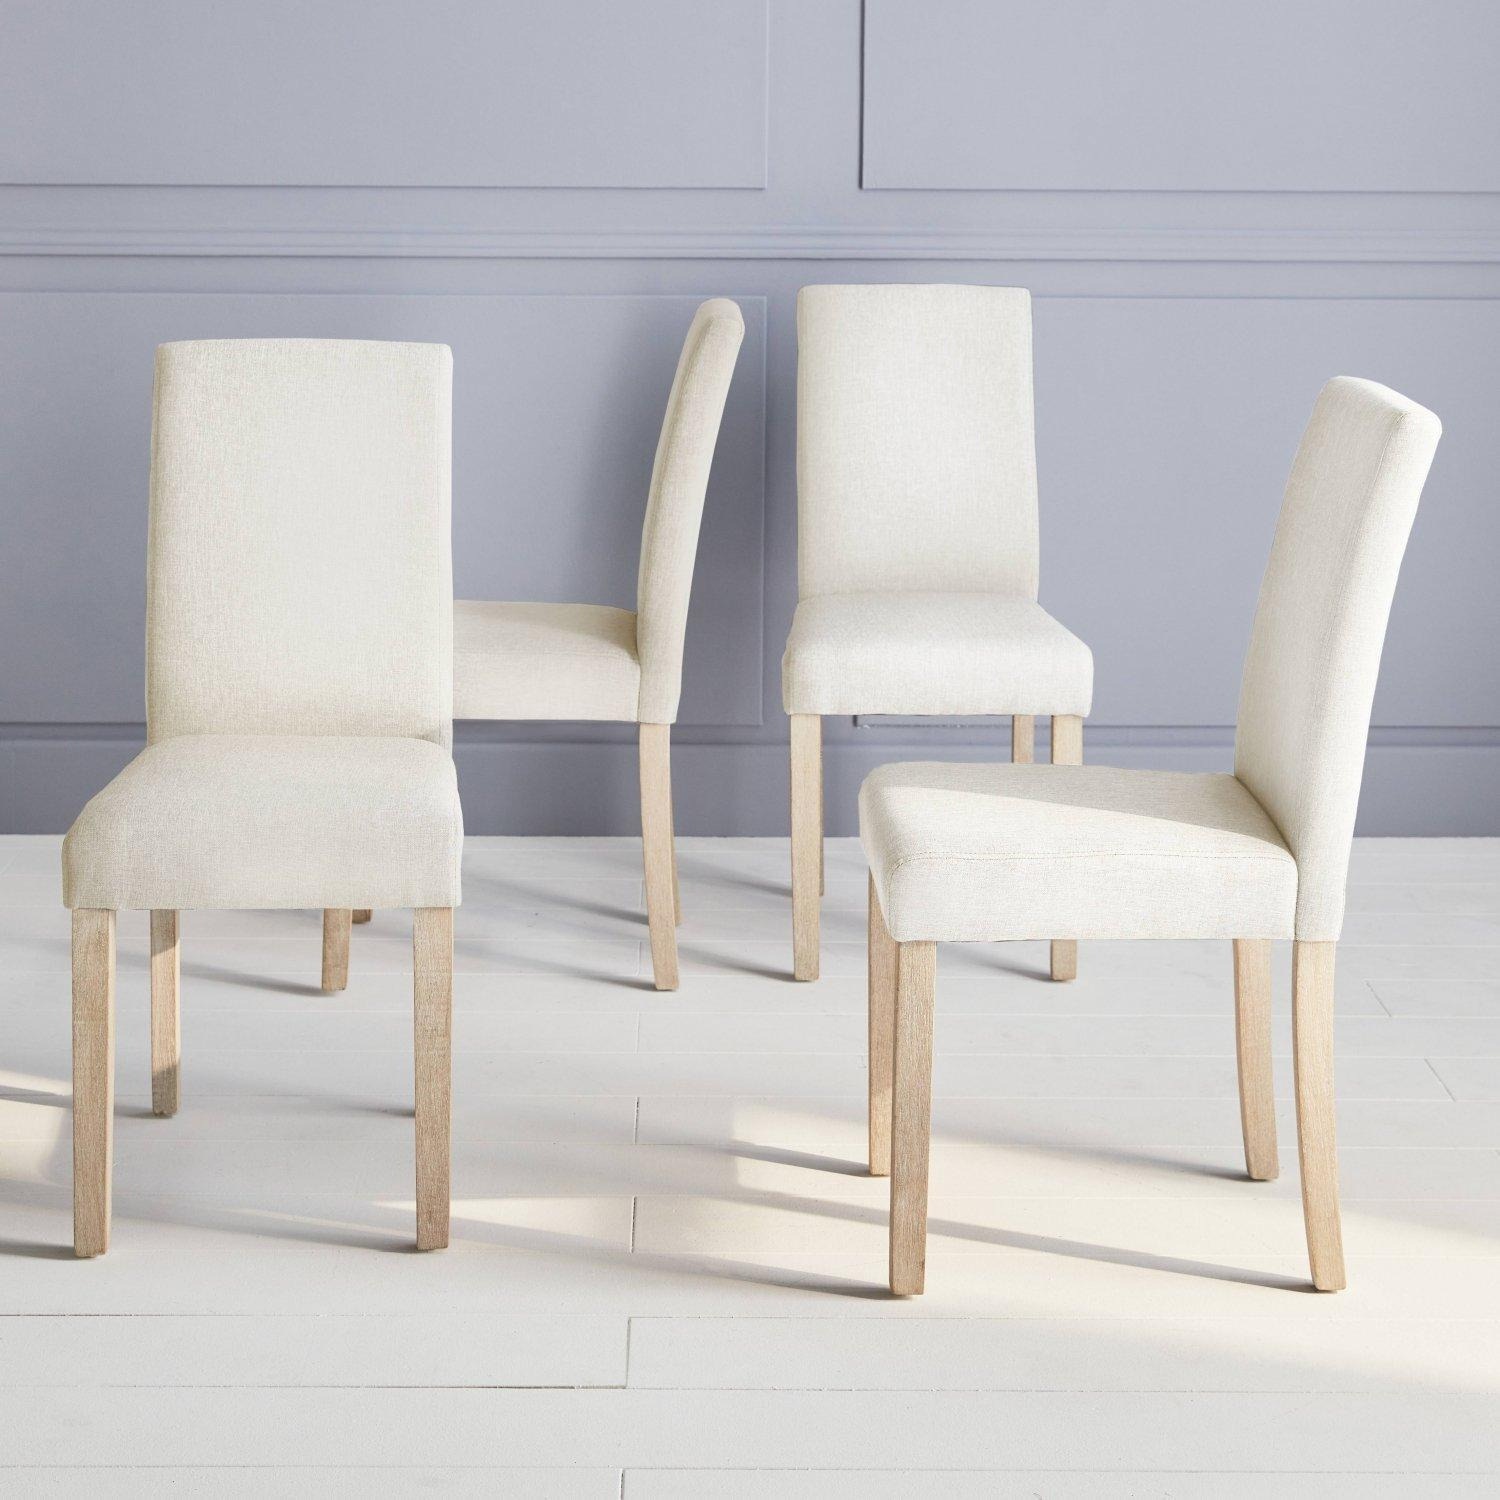 Set Of 4 Fabric Dining Chairs With Wooden Legs - image 1